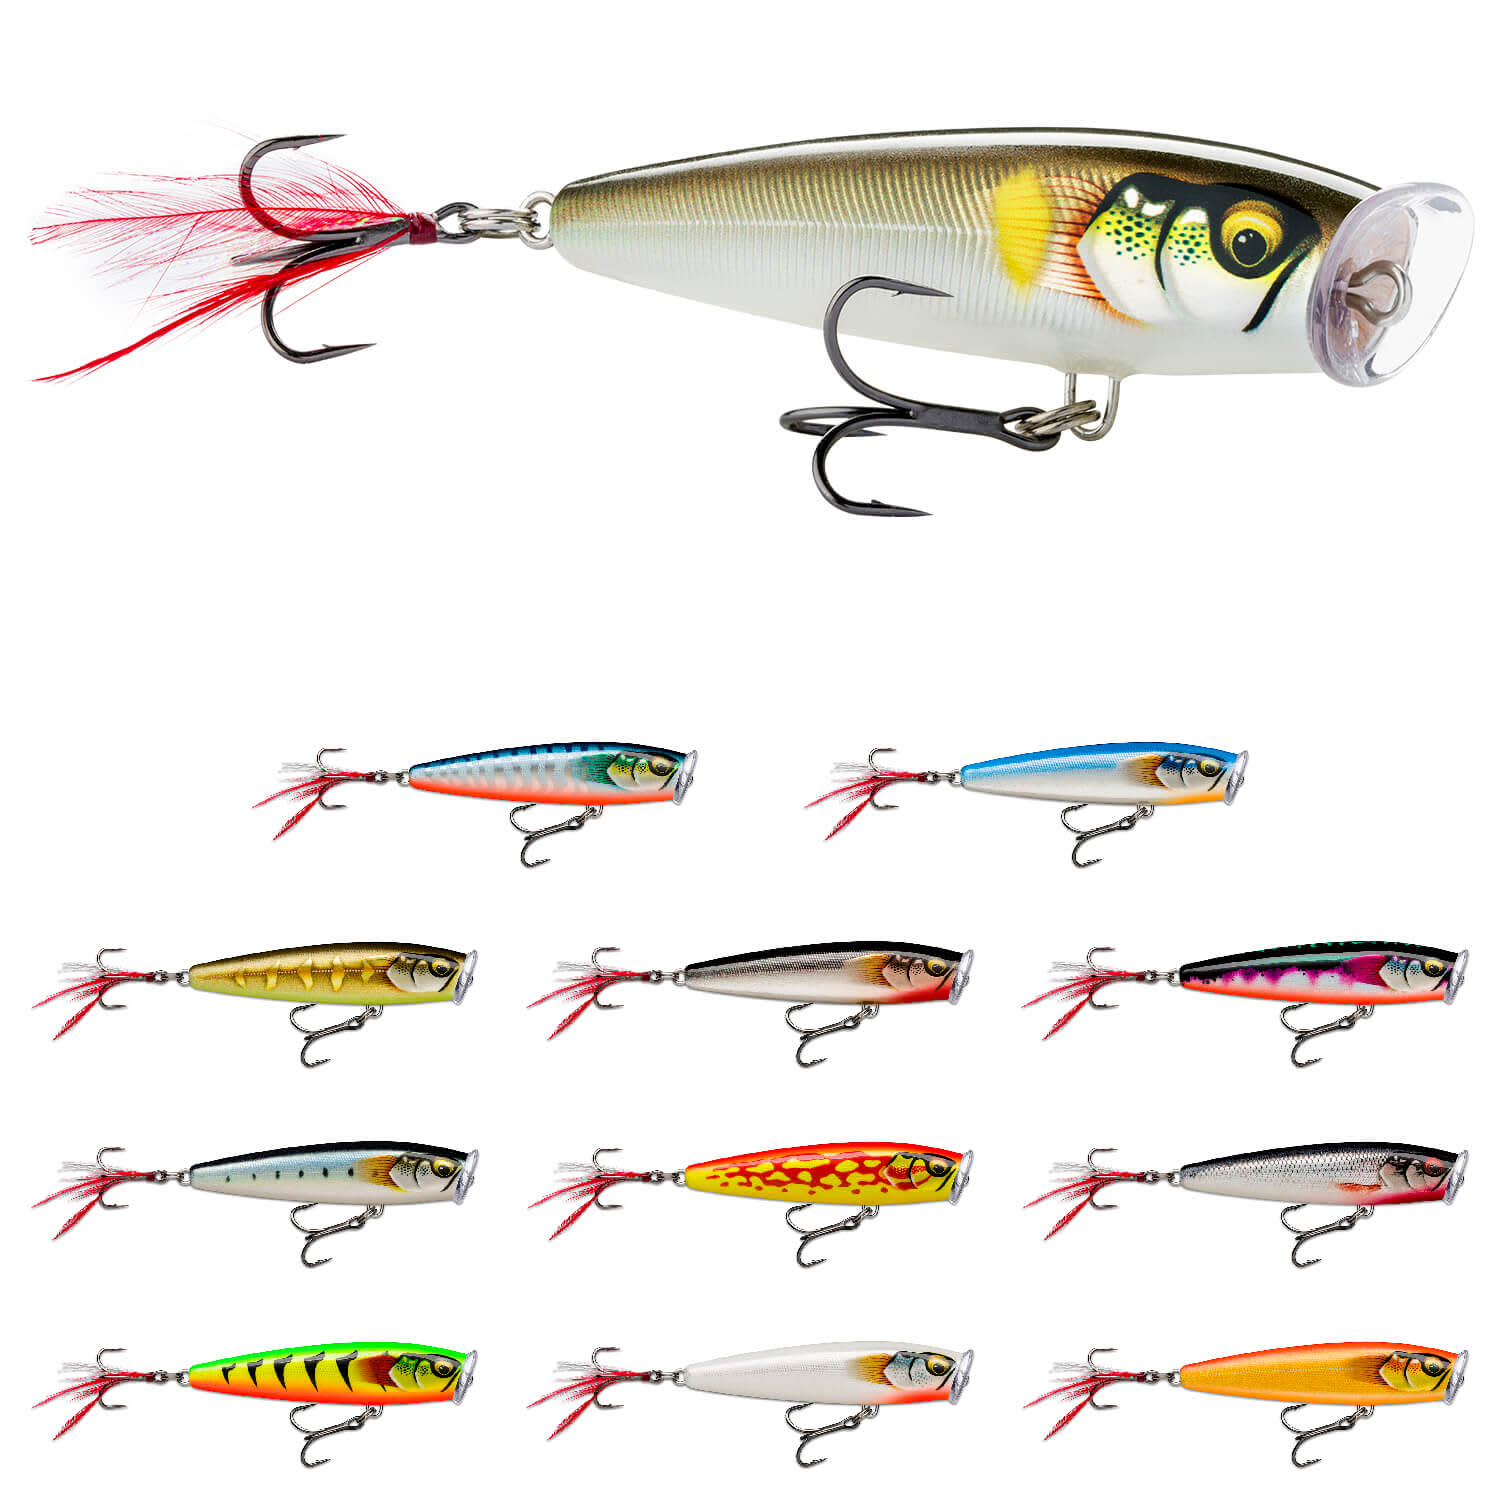 https://koeder-laden.mo.cloudinary.net/out/pictures/master/product/1/rapala-skitter-pop-elite-alle-12.jpg